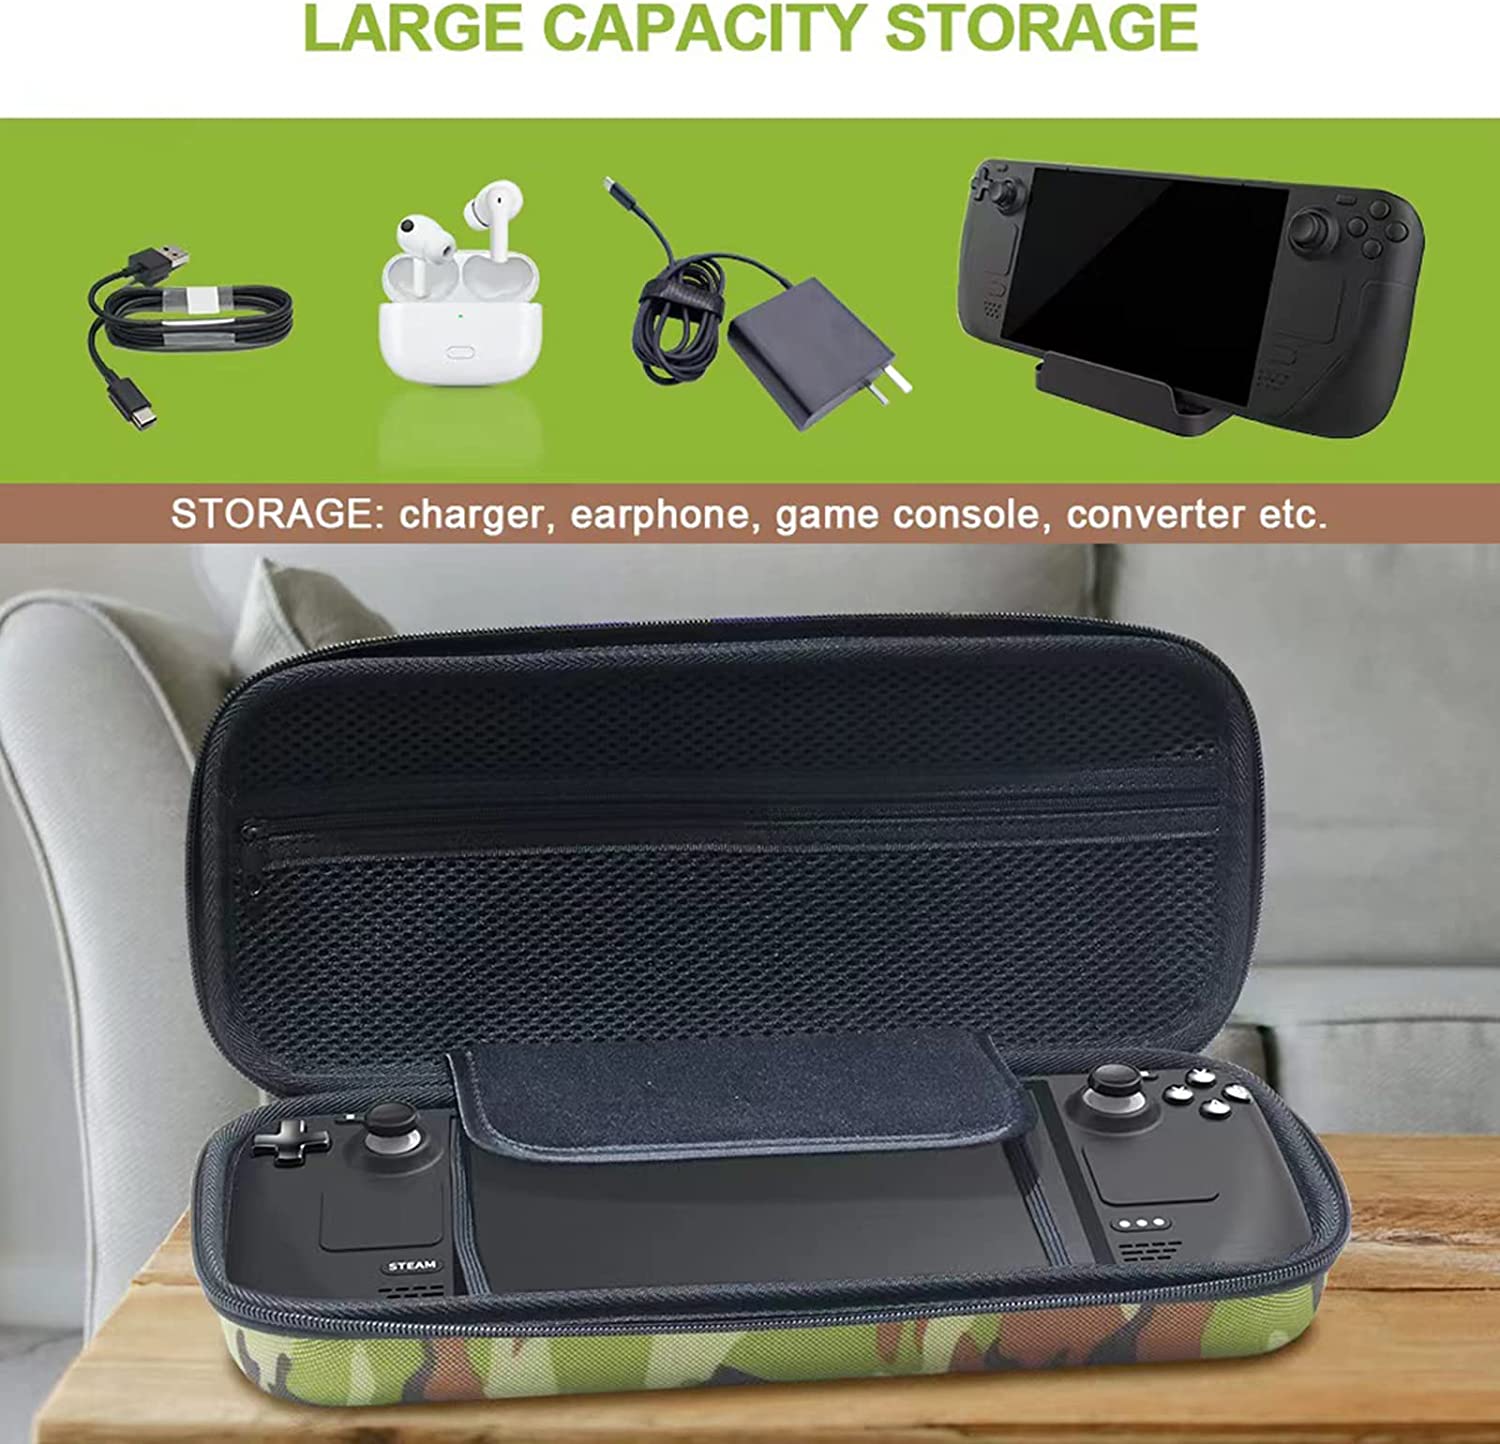 Steam Deck Case,carry Case For Steam Deck,game Traveler Steam Deck  Case,protective Hard Portable Travel Carry Case Shell Pouch With Pockets  For Access